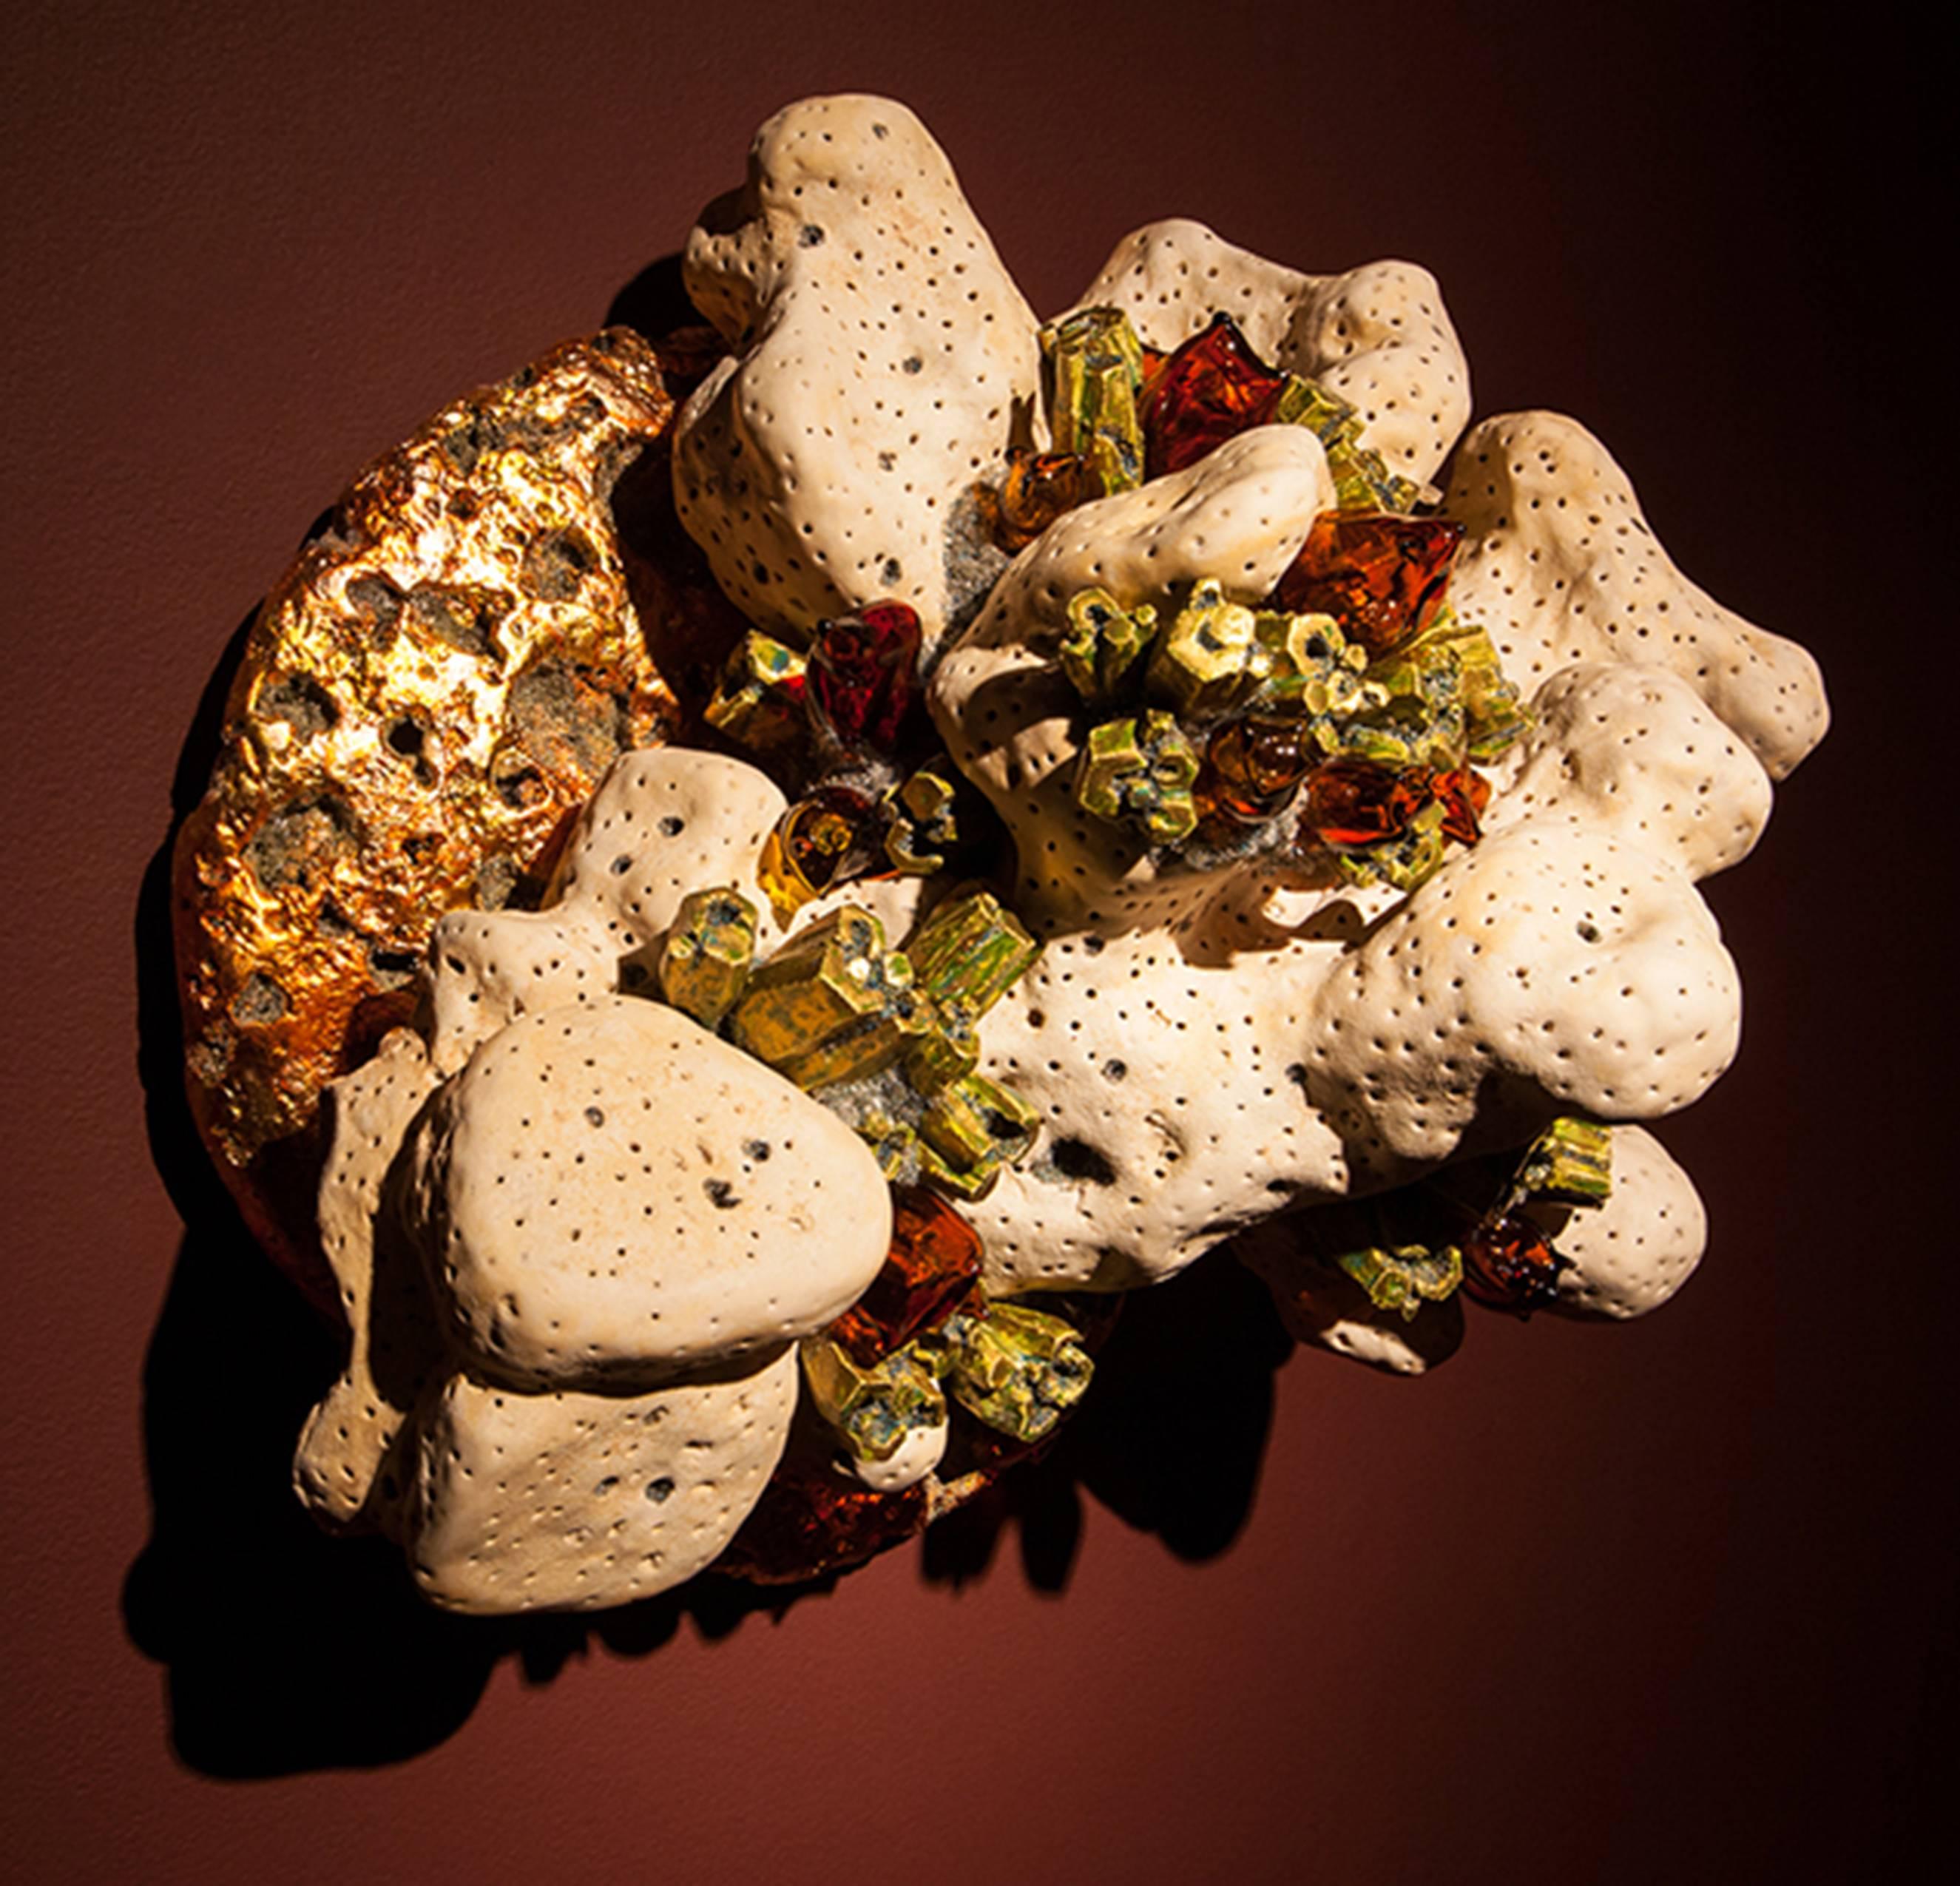 Petrified Coral, Pyromorphite, Amberite, Copper Cabochon - Sculpture by Renee Brown